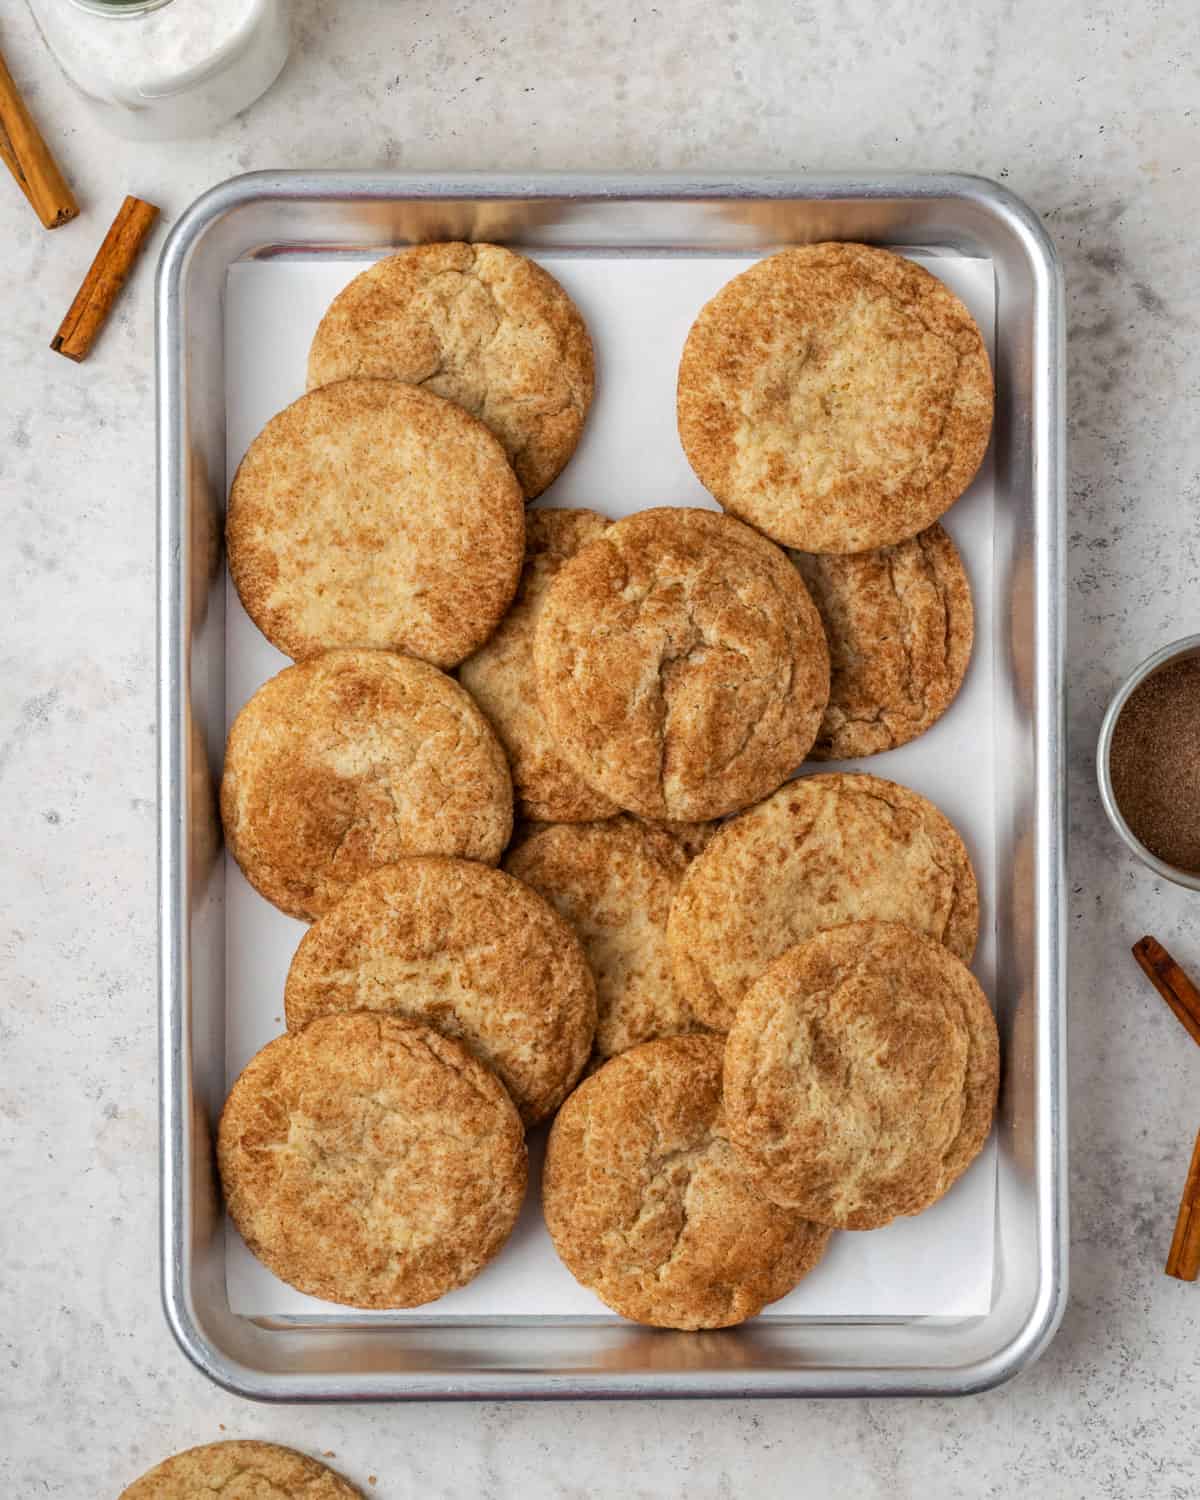 A baking tray piled with gluten free snickerdoodles sitting on a white table.